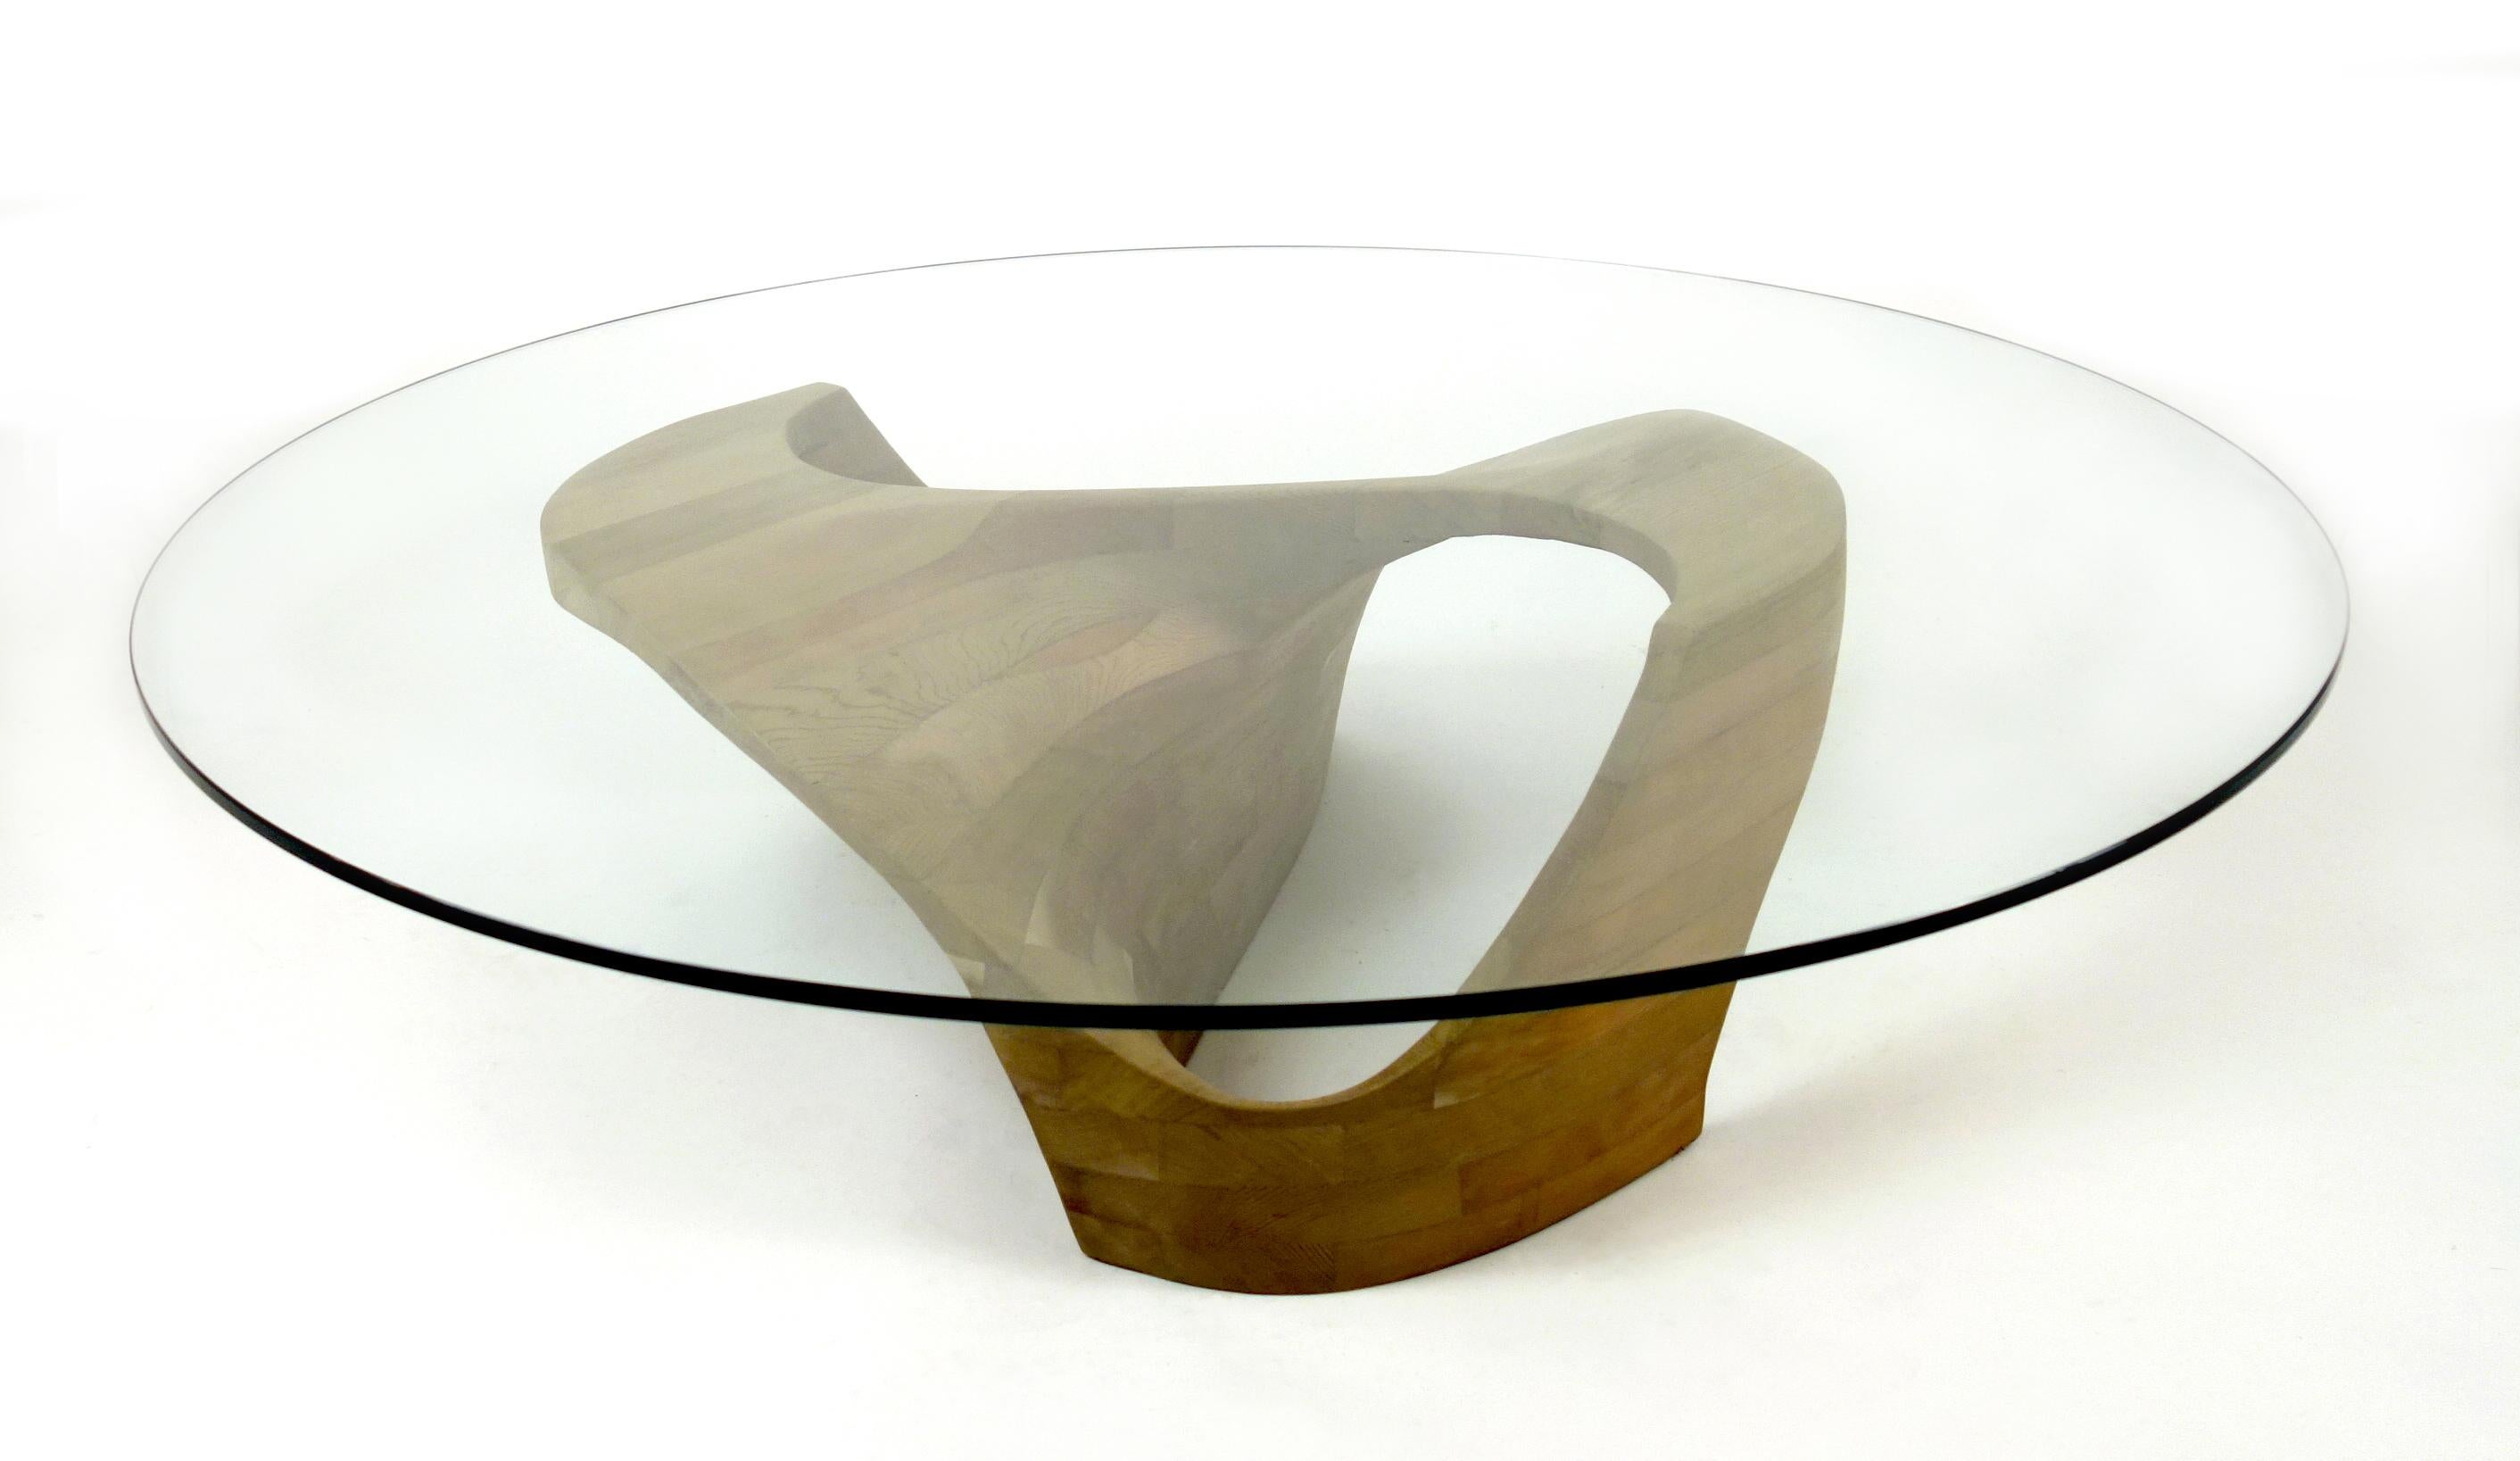 Loch coffee table by Aaron Scott
Dimensions: D 137.5 x W 137.5 x H 36 cm
Materials: atlantic cedar, glass.
Also available in other woods: bleached cherry, walnut.


Brooklyn-based designer Aaron Scott was raised in the mountains and forests of